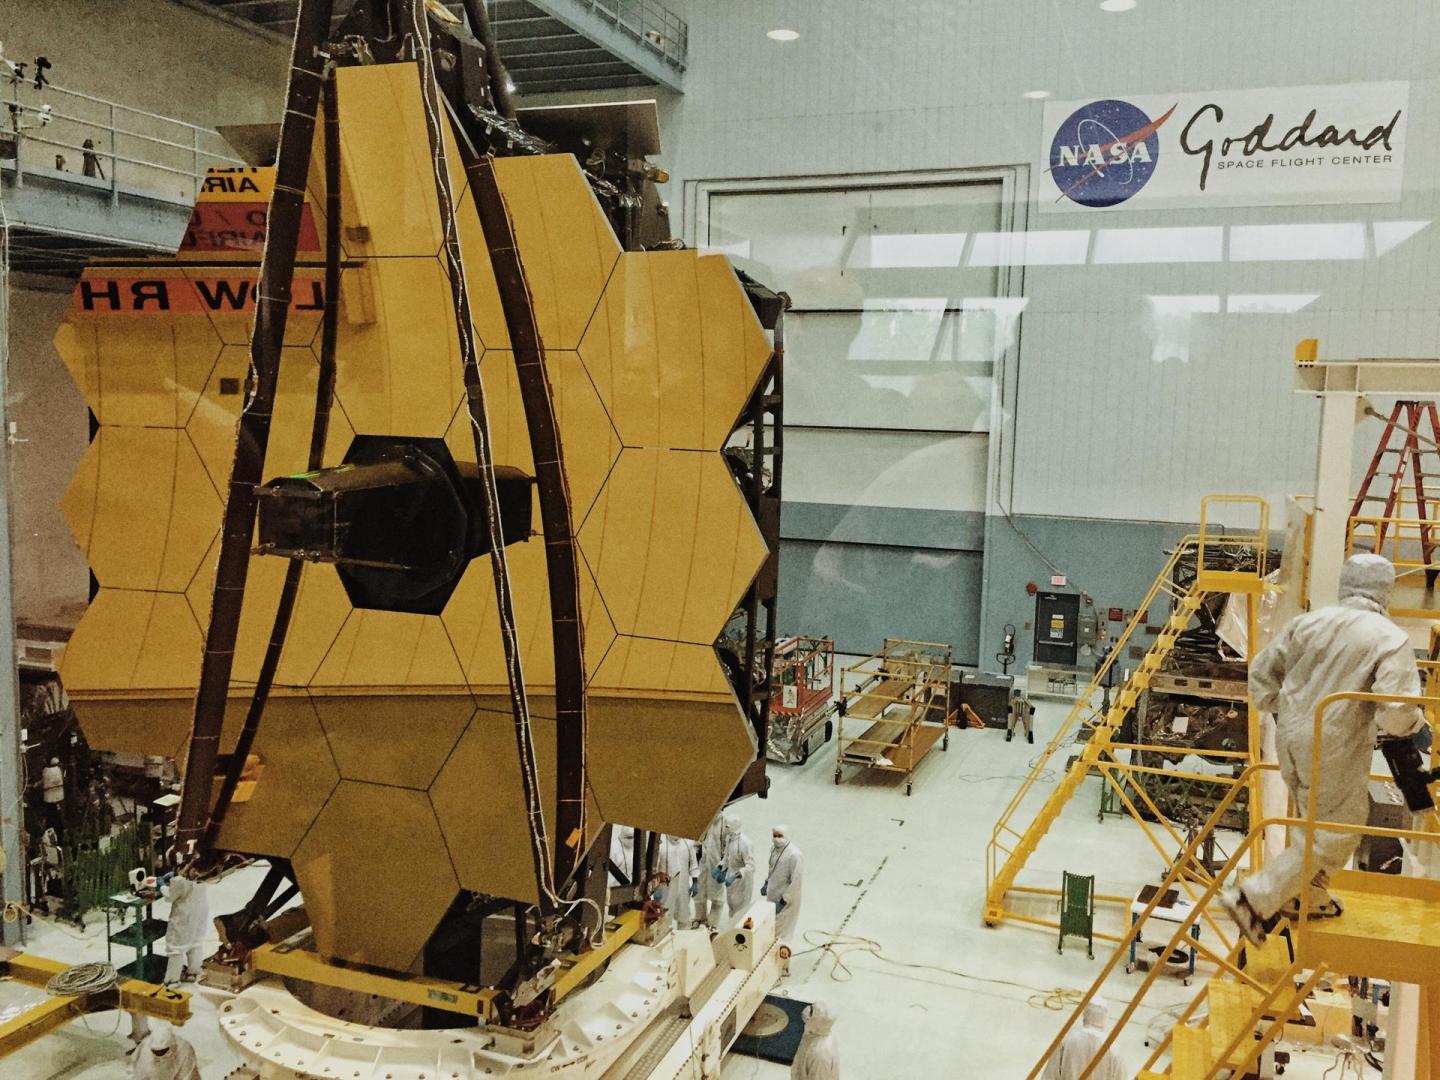 The James Webb Space Telescope surrounded by yellow hexagonal mirrors